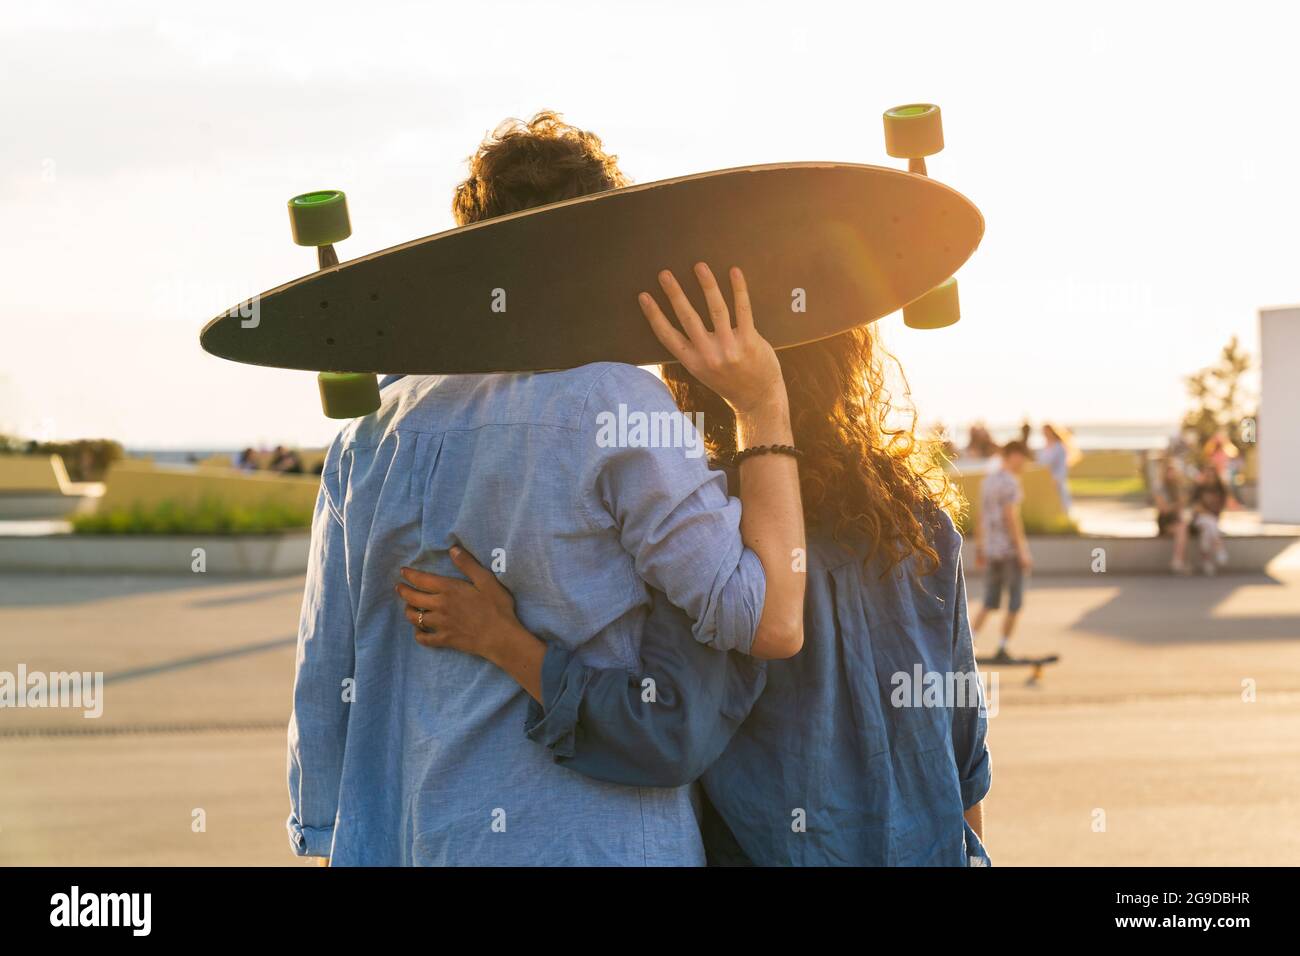 Romantic couple of skateboarders enjoy sunset embracing with longboard in hands in urban skate park Stock Photo